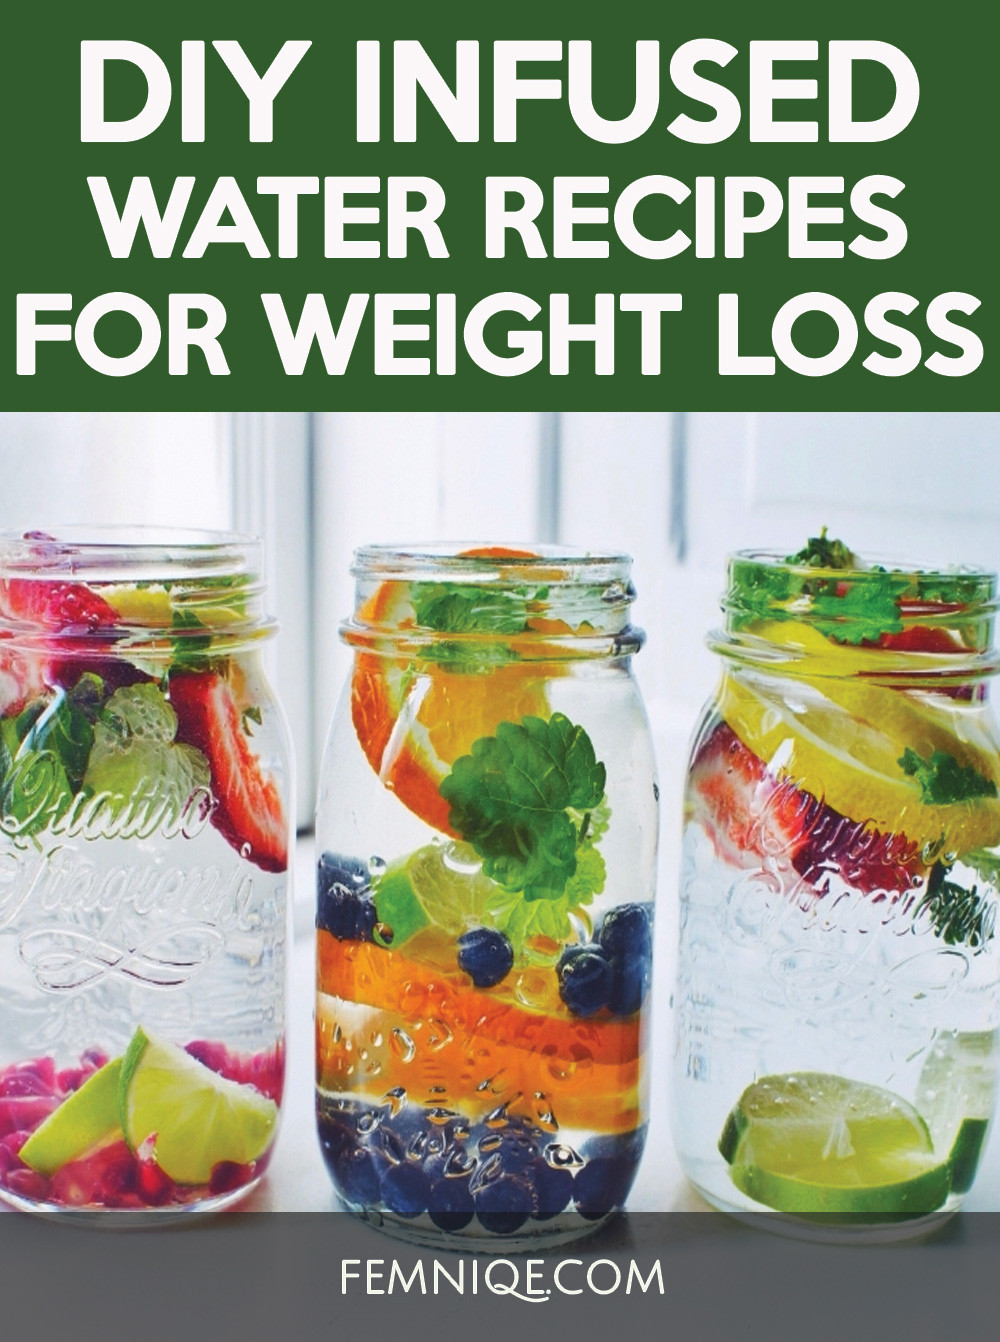 Infused Water Recipes For Weight Loss
 DIY Fruit Infused Water Recipes For Weight Loss Femniqe